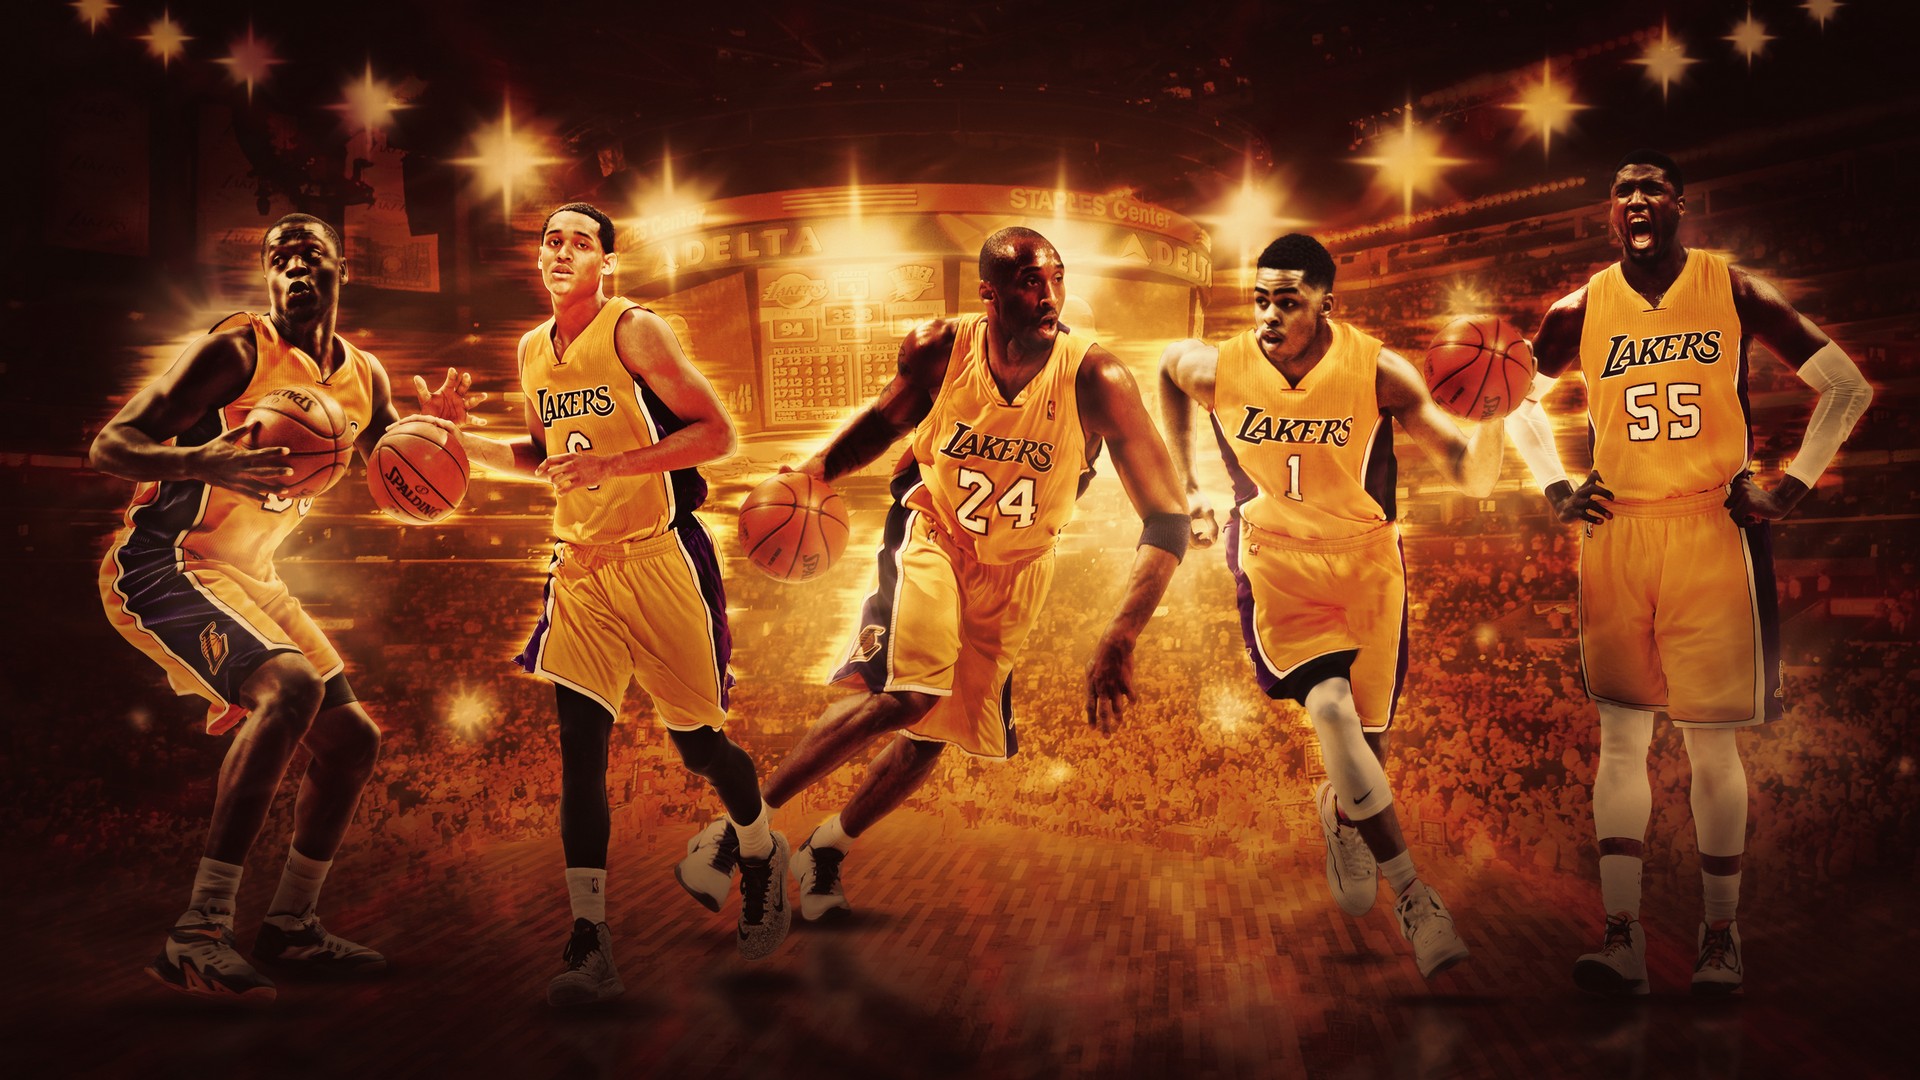 HD Desktop Wallpaper LA Lakers with image dimensions 1920x1080 pixel. You can make this wallpaper for your Desktop Computer Backgrounds, Windows or Mac Screensavers, iPhone Lock screen, Tablet or Android and another Mobile Phone device